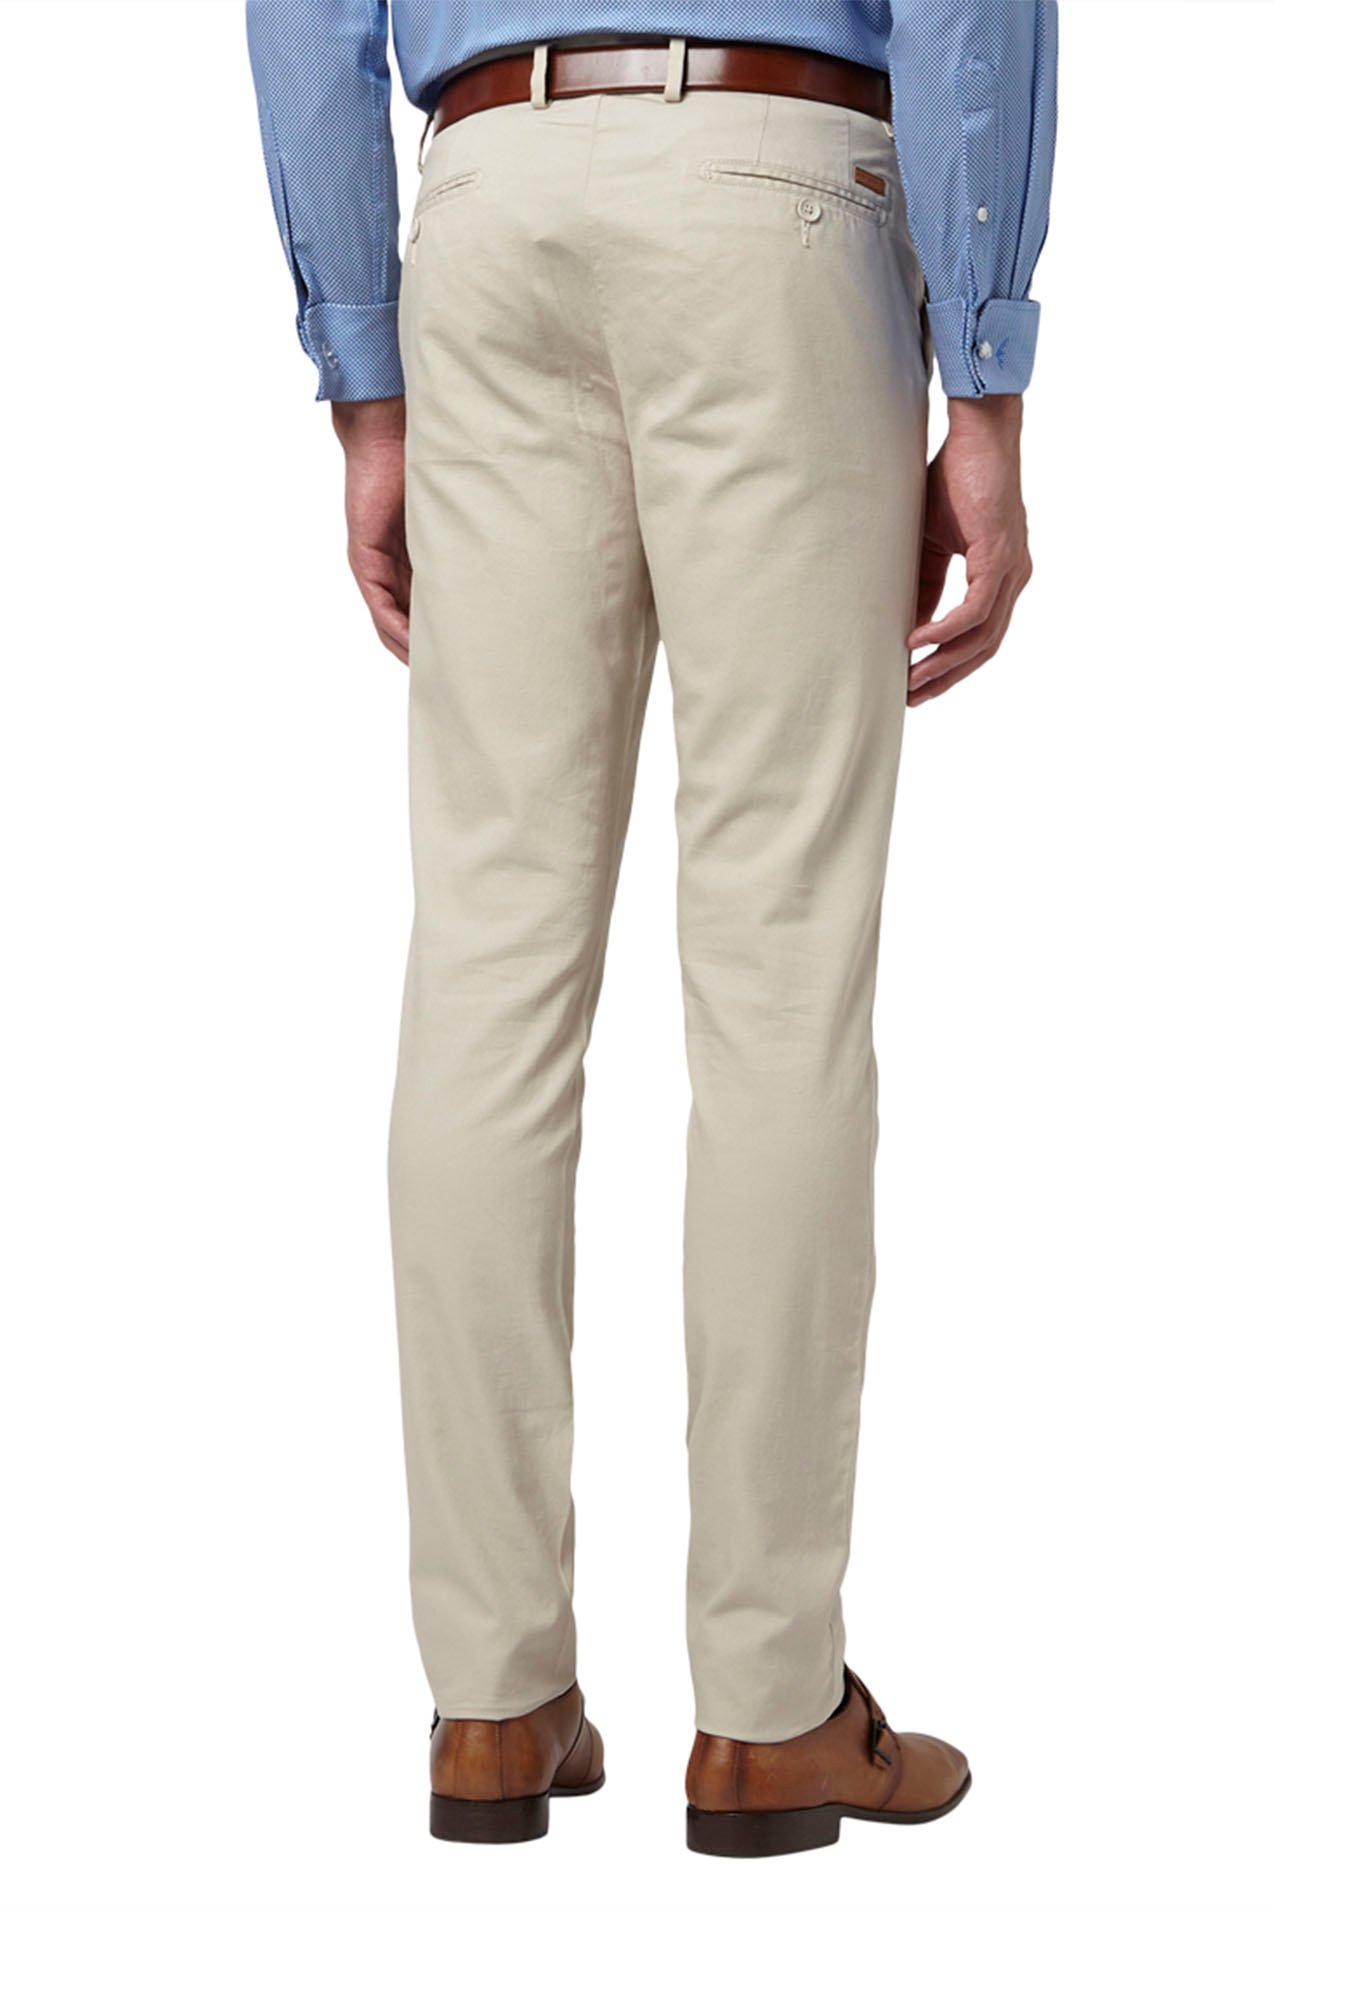 Park Avenue Pleated Trousers - Buy Park Avenue Pleated Trousers online in  India